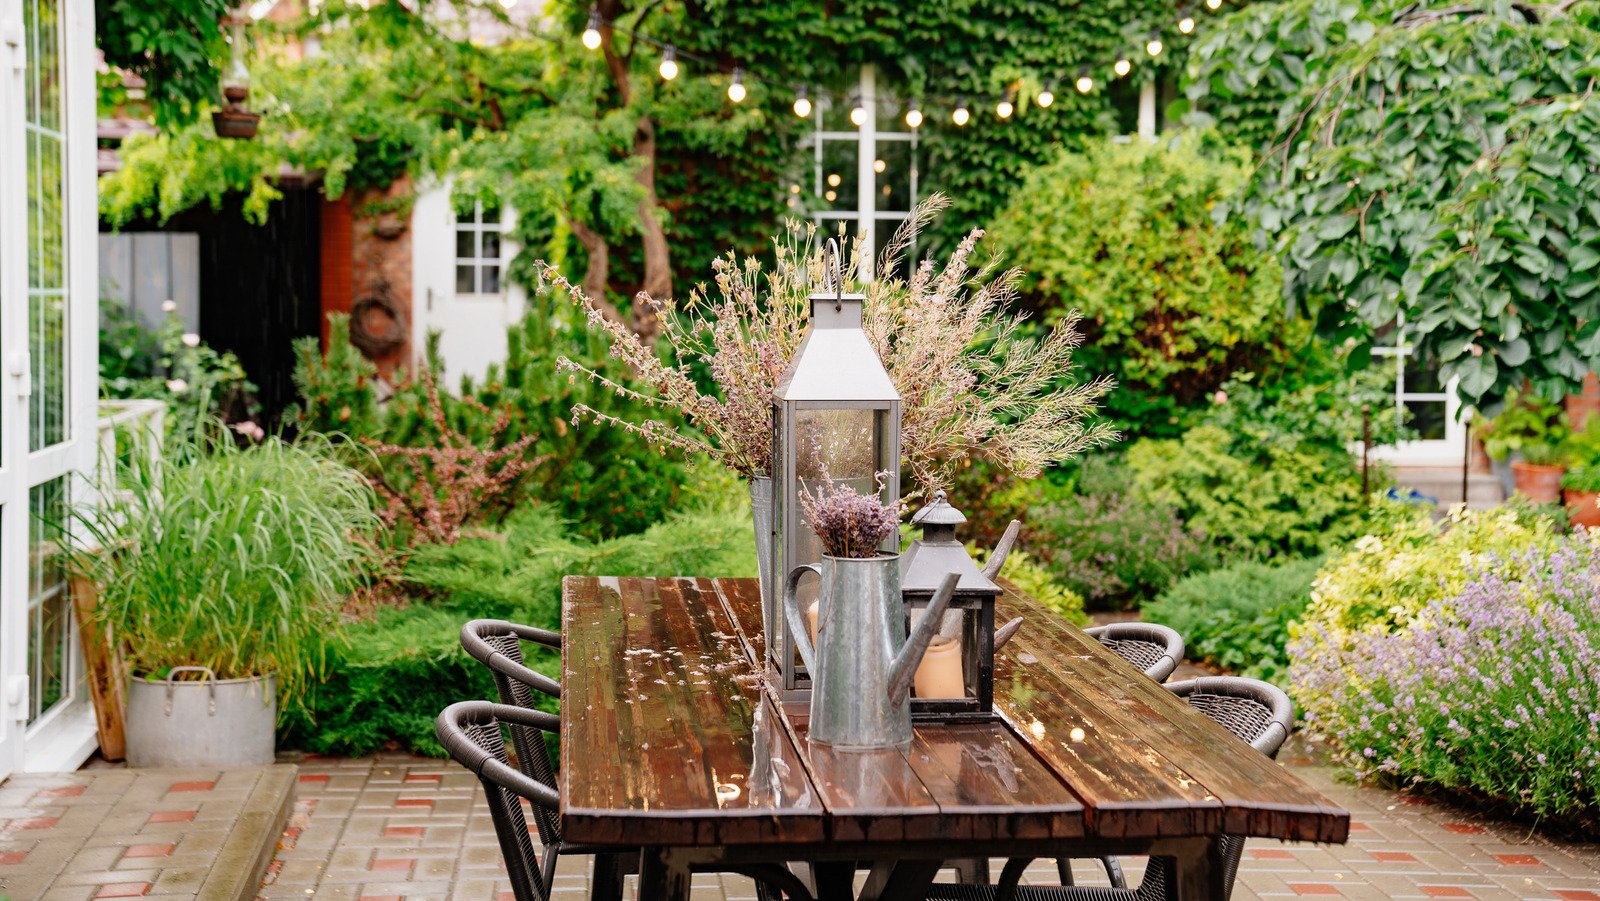 Transform Your Small Backyard With These Landscaping Ideas